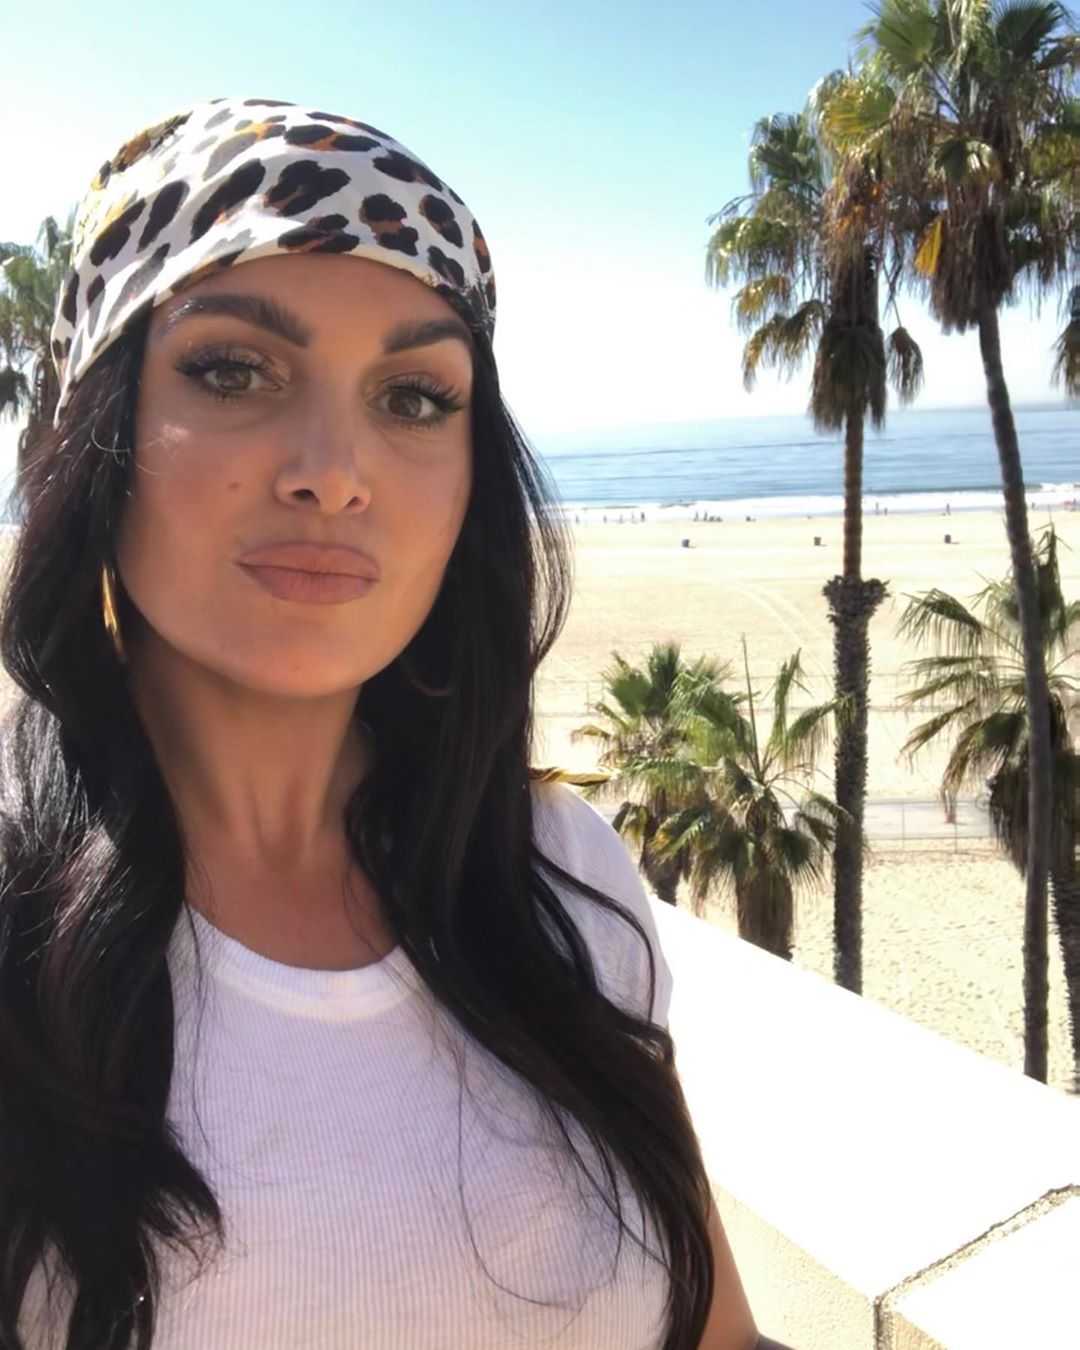 70+ Hot Pictures Of Molly Qerim Are So Damn Sexy That We Don’t Deserve Her 7